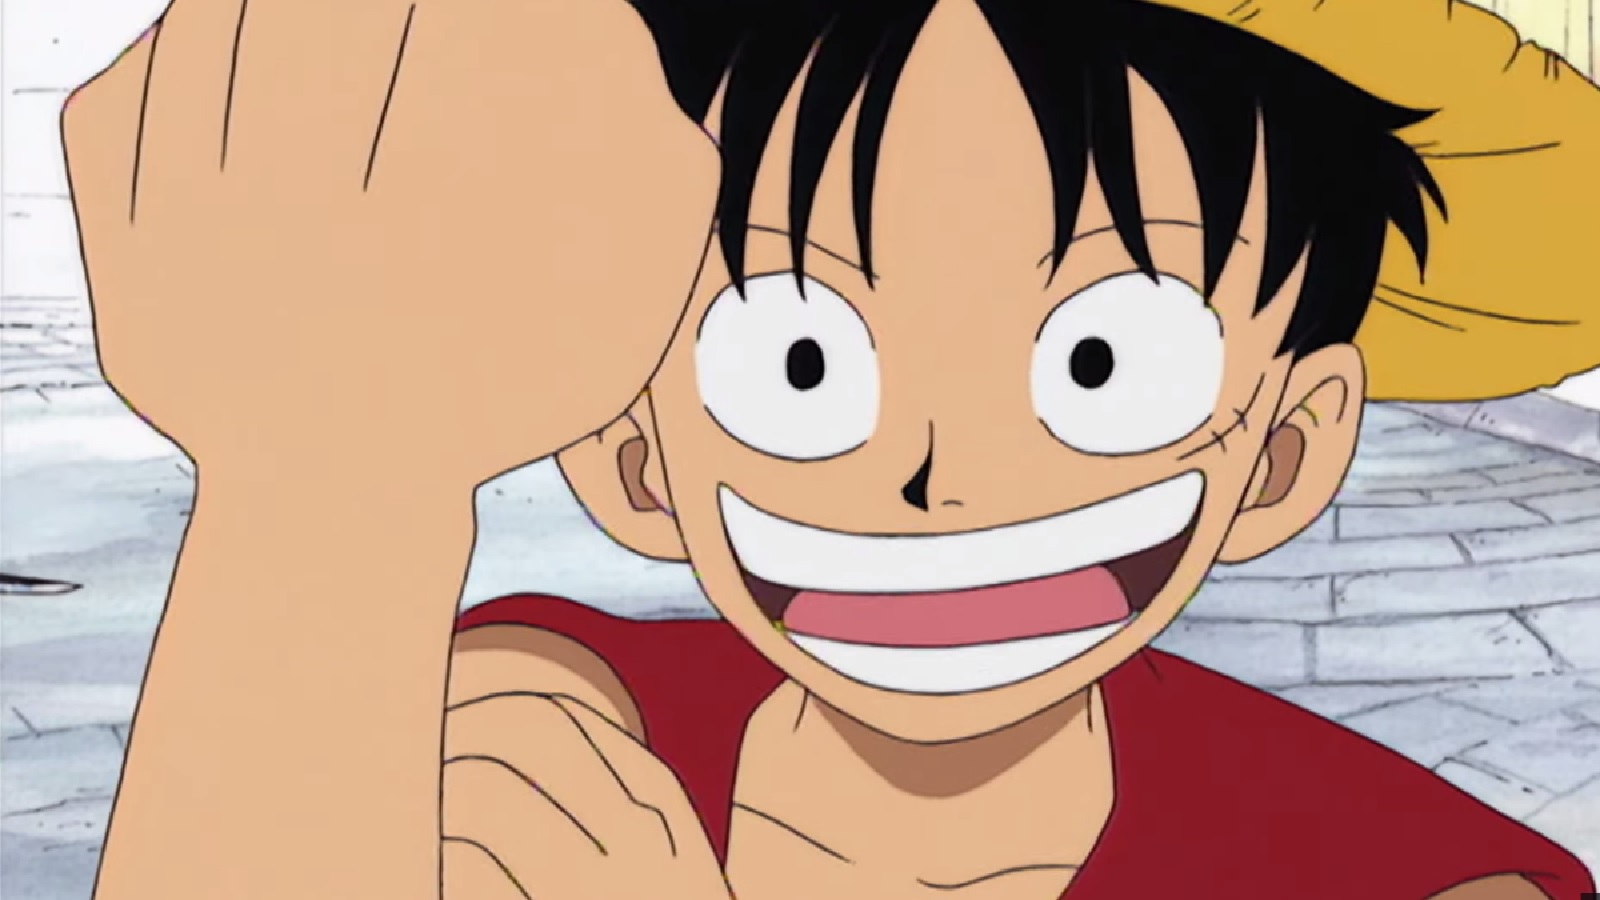 When does One Piece get good?